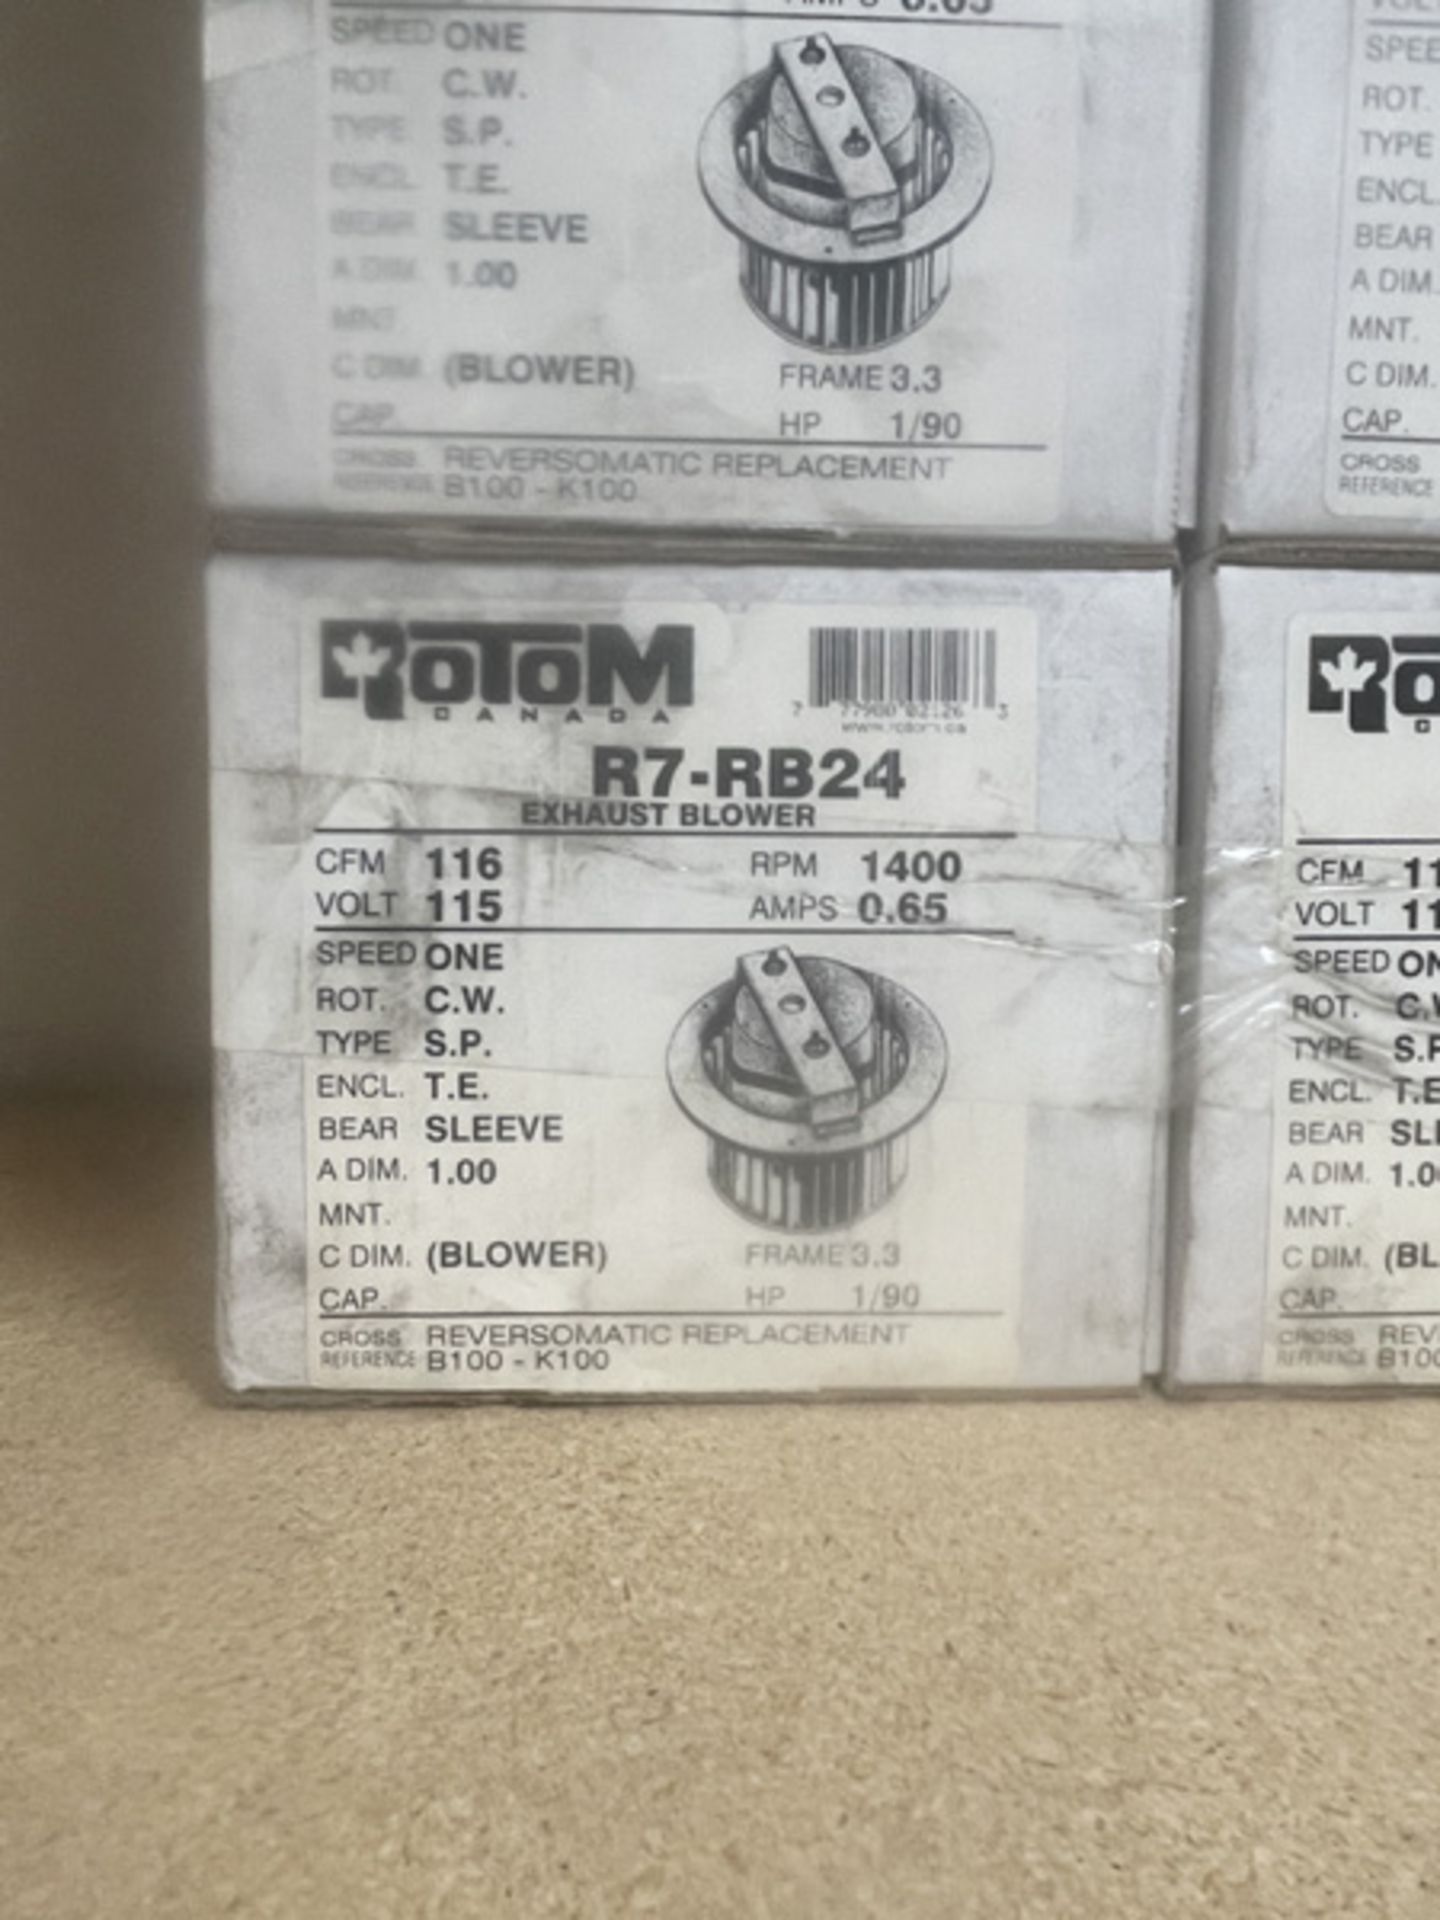 LOT - (13) ROTOM R7-RB24 EXHAUST BLOWERS - 115V, 1400RPM - Image 2 of 2